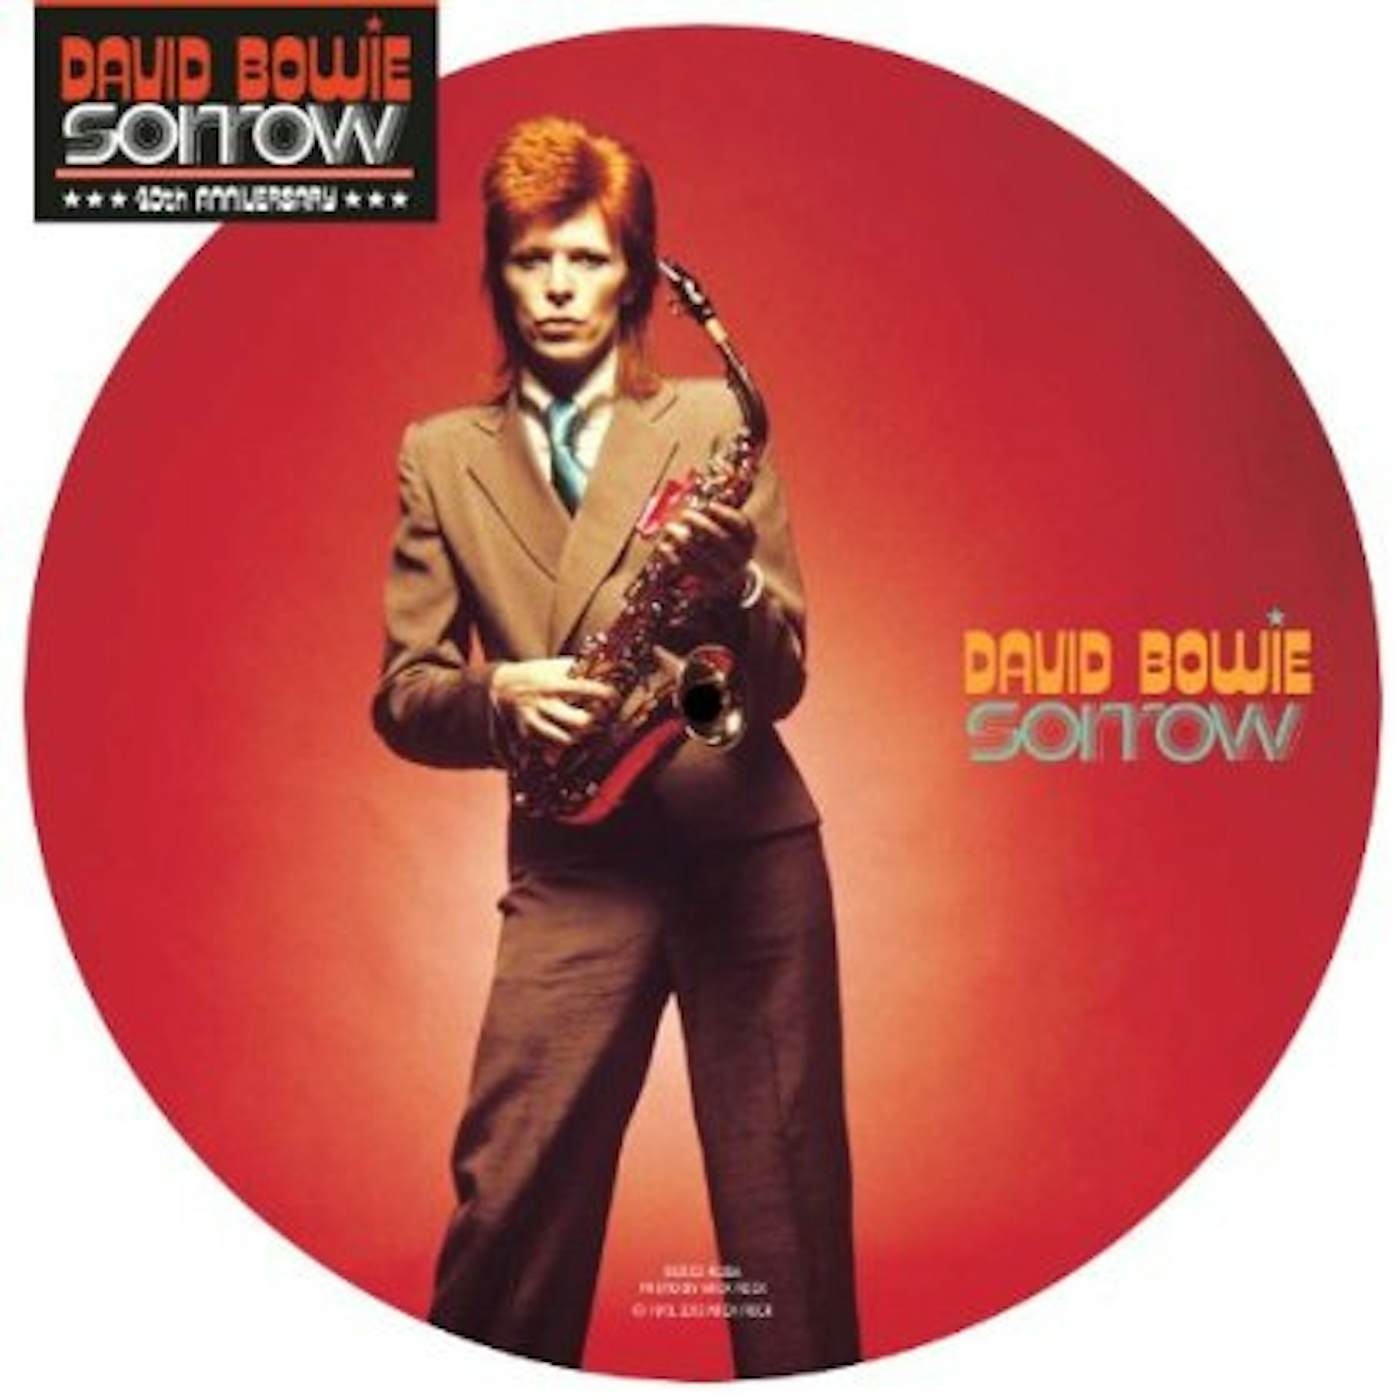 David Bowie SORROW (40TH ANNIVERSARY PICTURE DISC) Vinyl Record - Picture Disc